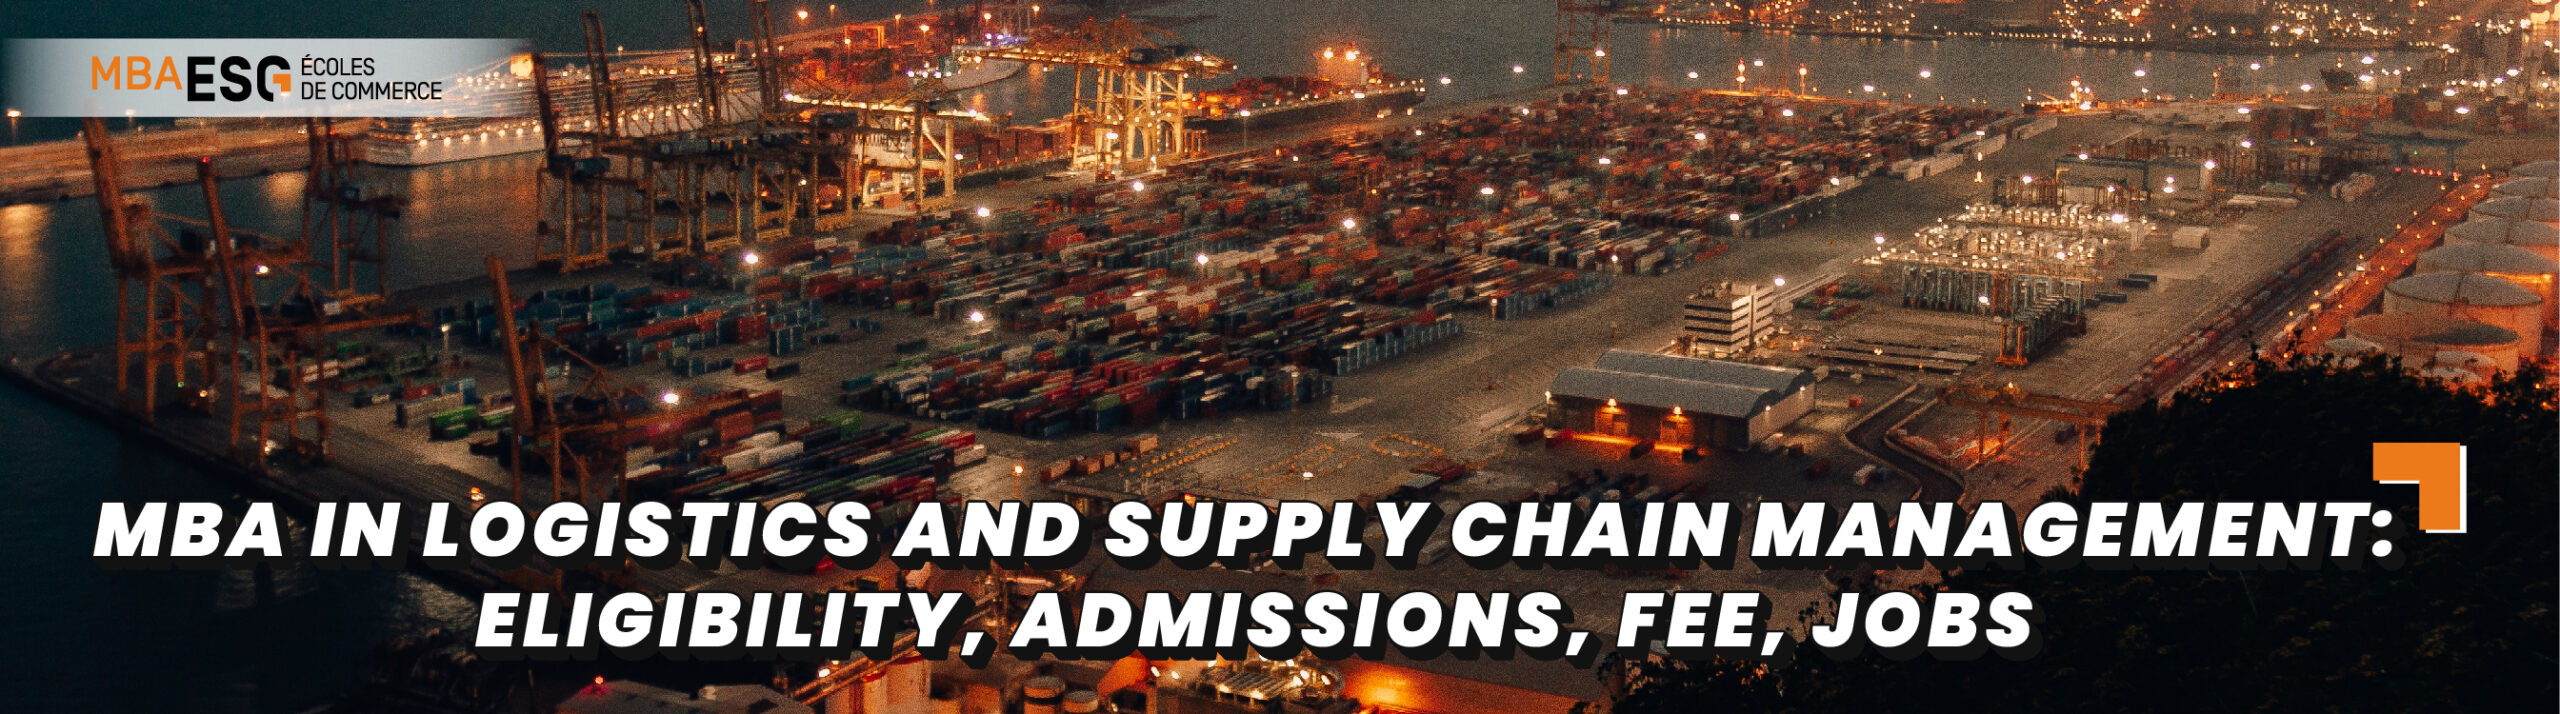 MBA in Logistics and Supply Chain Management